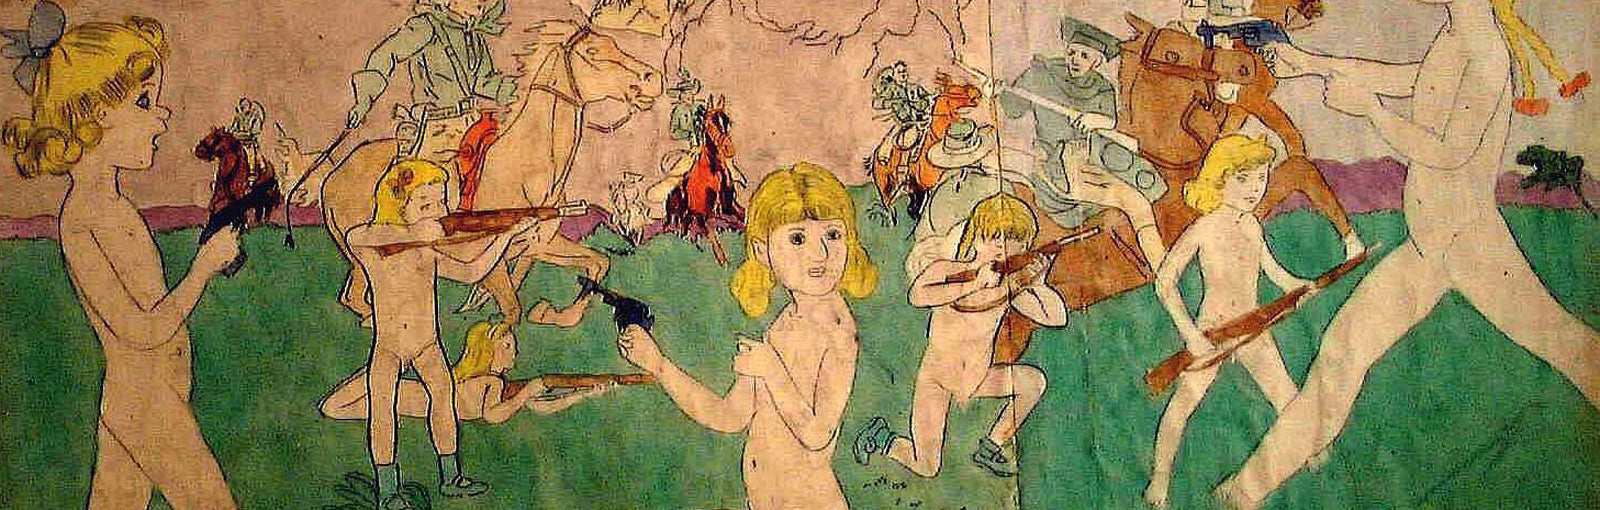 THE DISTURBED GENIUS OF OUTSIDER ARTIST HENRY DARGER